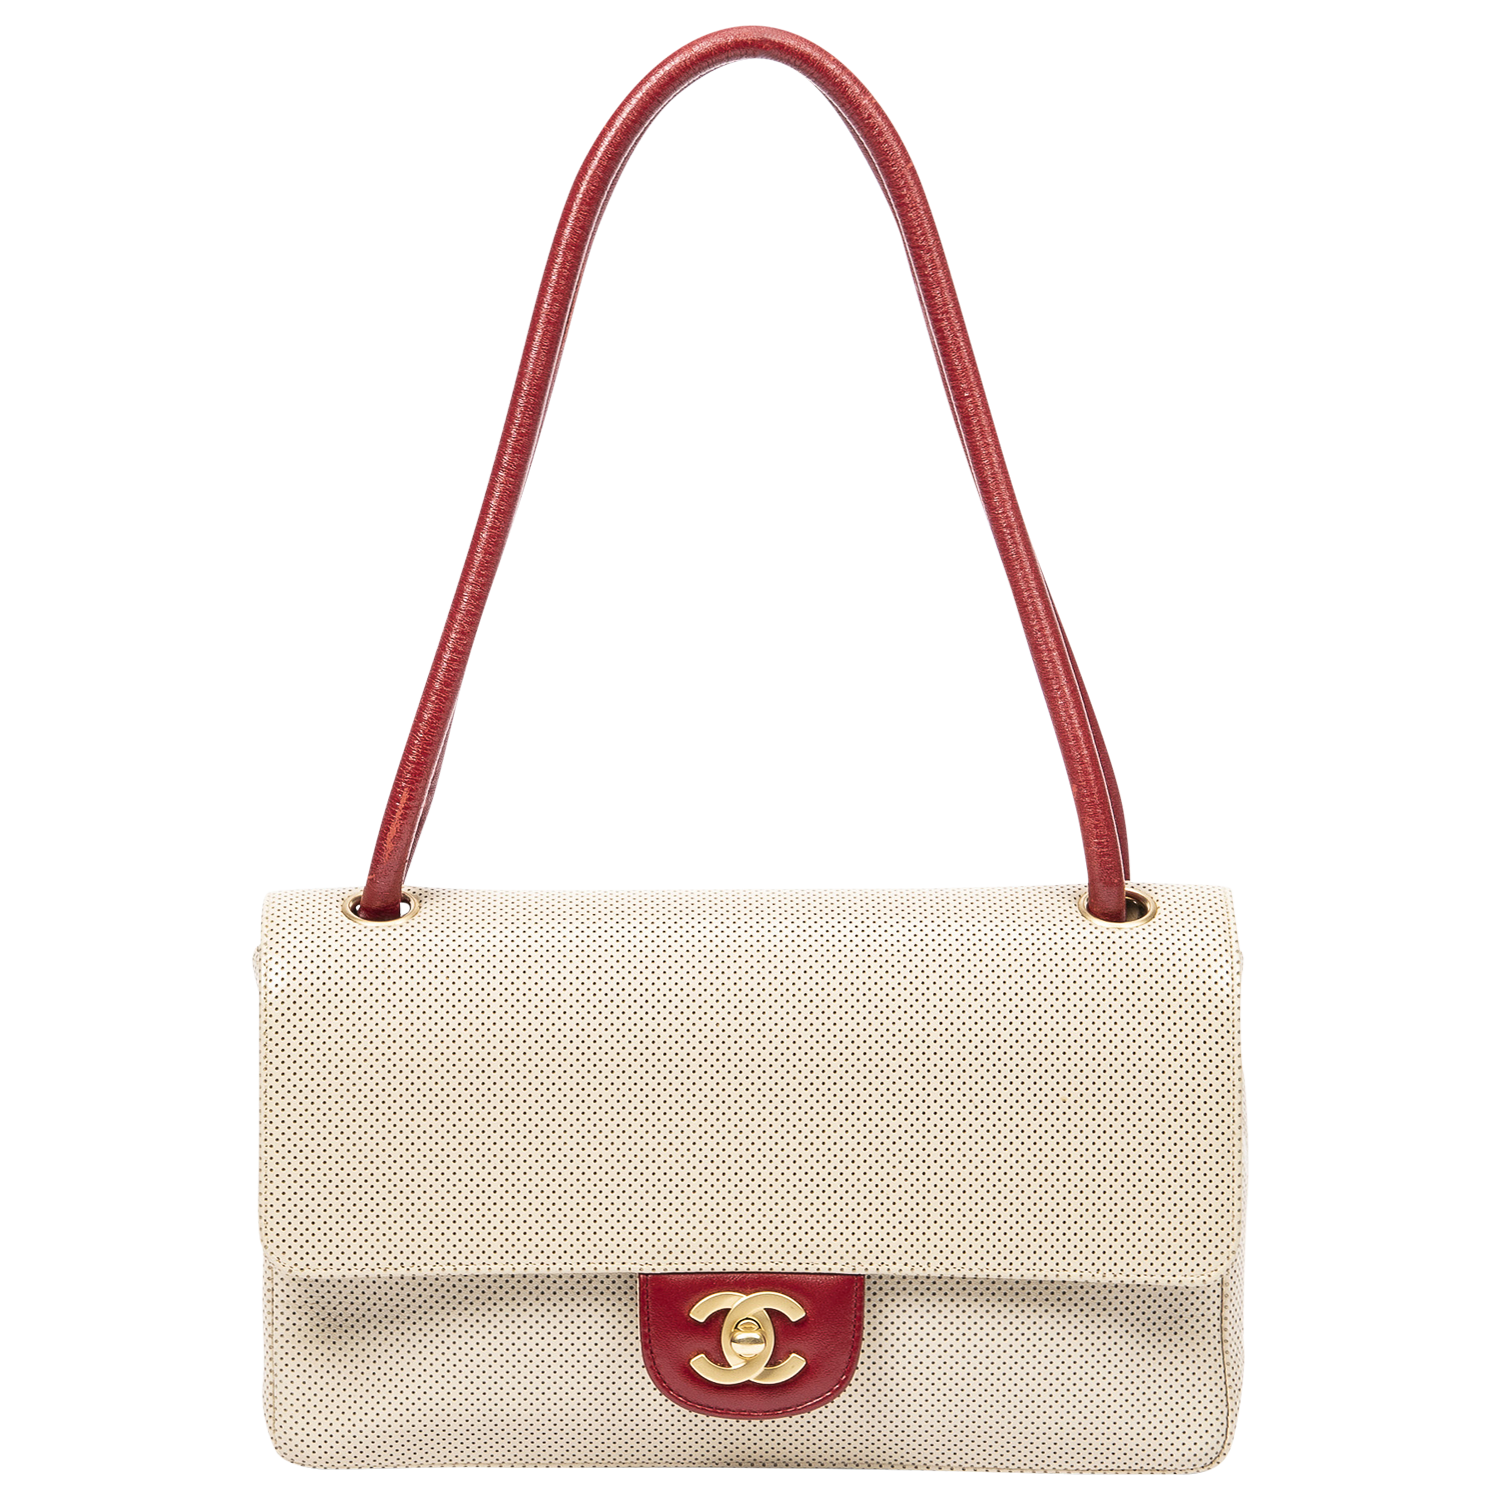 Chanel Beige/Red Perforated Leather CC Turnlock Flap Bag